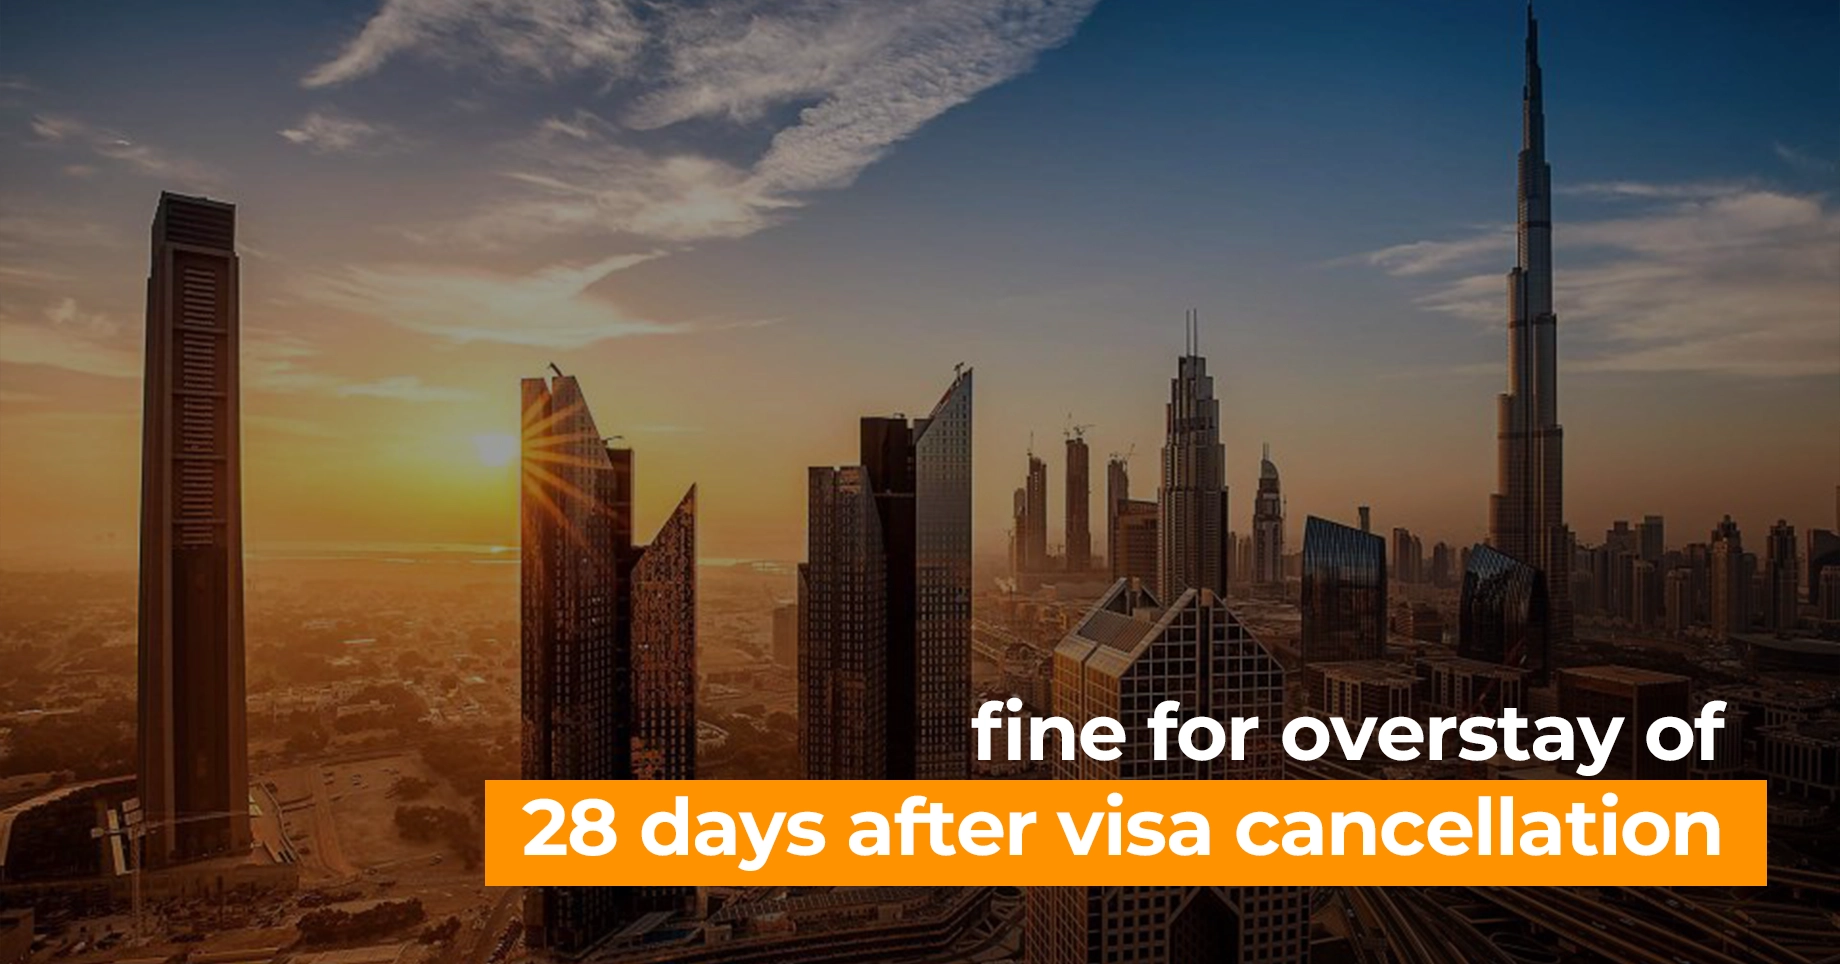 Understanding the Fine for Overstay of 28 Days After Visa Cancellation